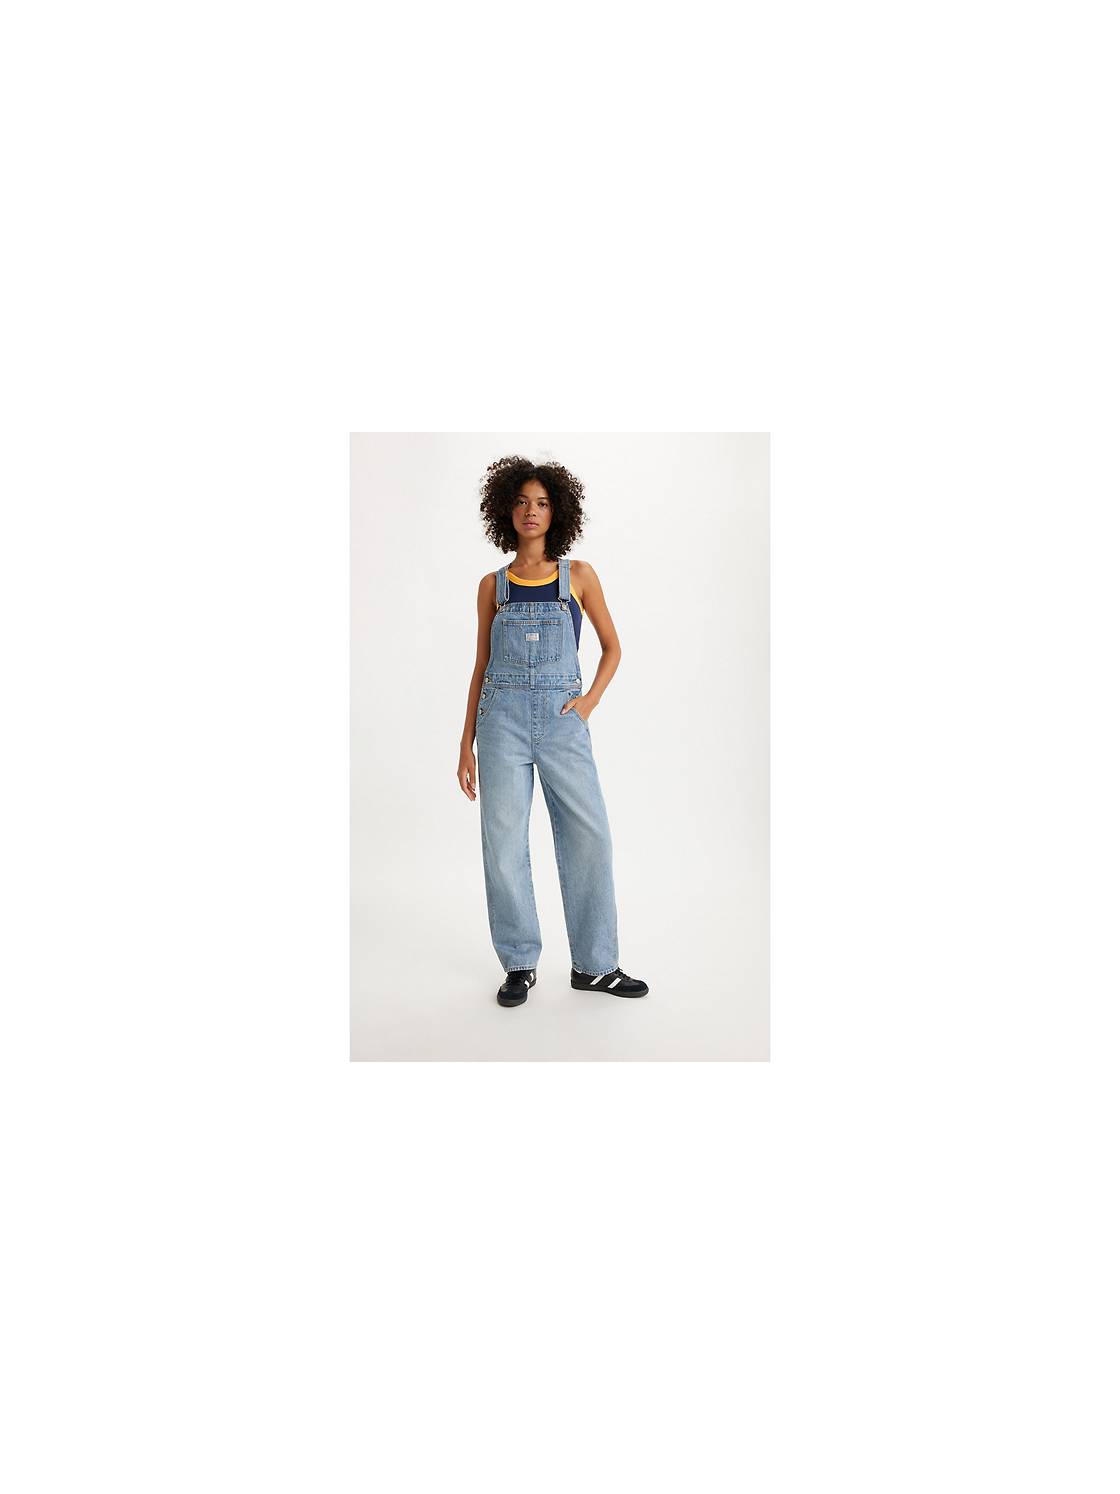 Wash Clothing Company Ladies Loose Fit Cotton Jersey Dungarees